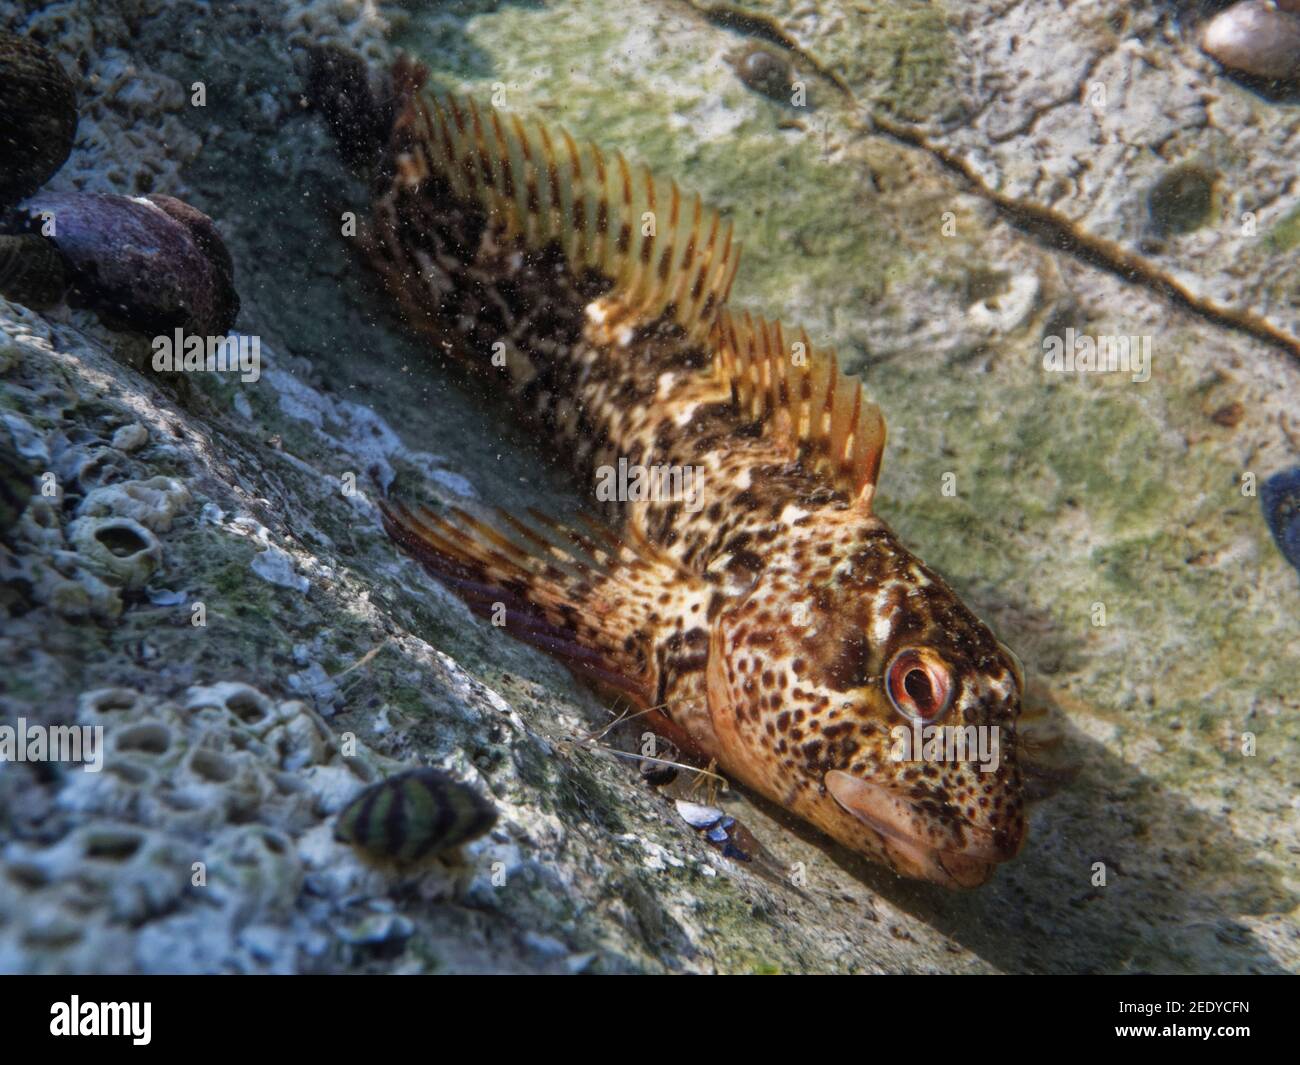 Close up view of a Common Blenny / Shanny (Lipophrys pholis) in a rock pool, The Gower, Wales, UK, September. Stock Photo